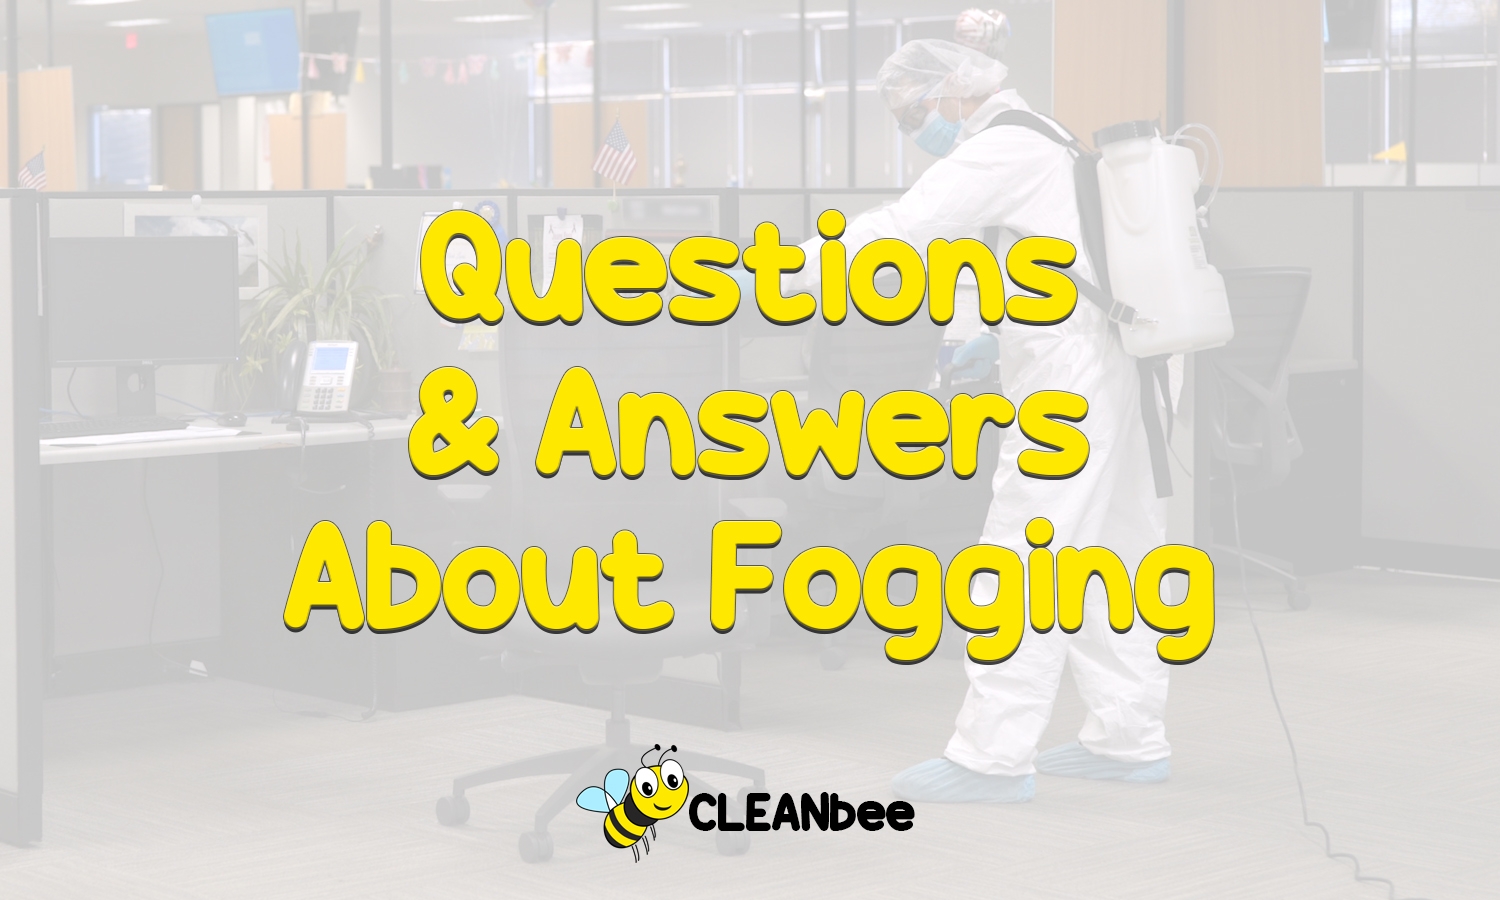 Questions and Answers About Fogging